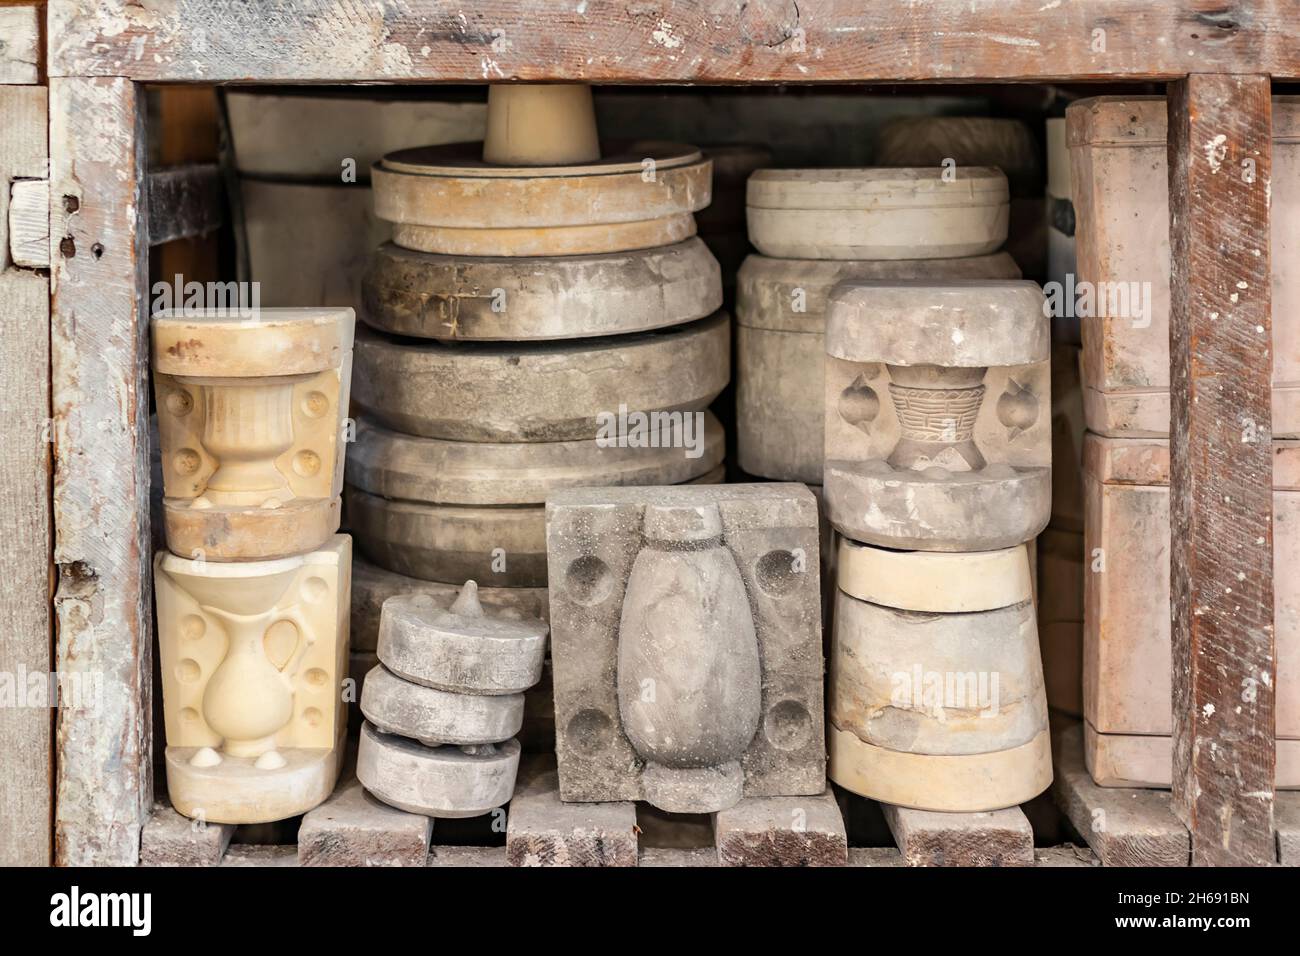 Ceramic Molds On Racks In Factory. Stock Photo, Picture and